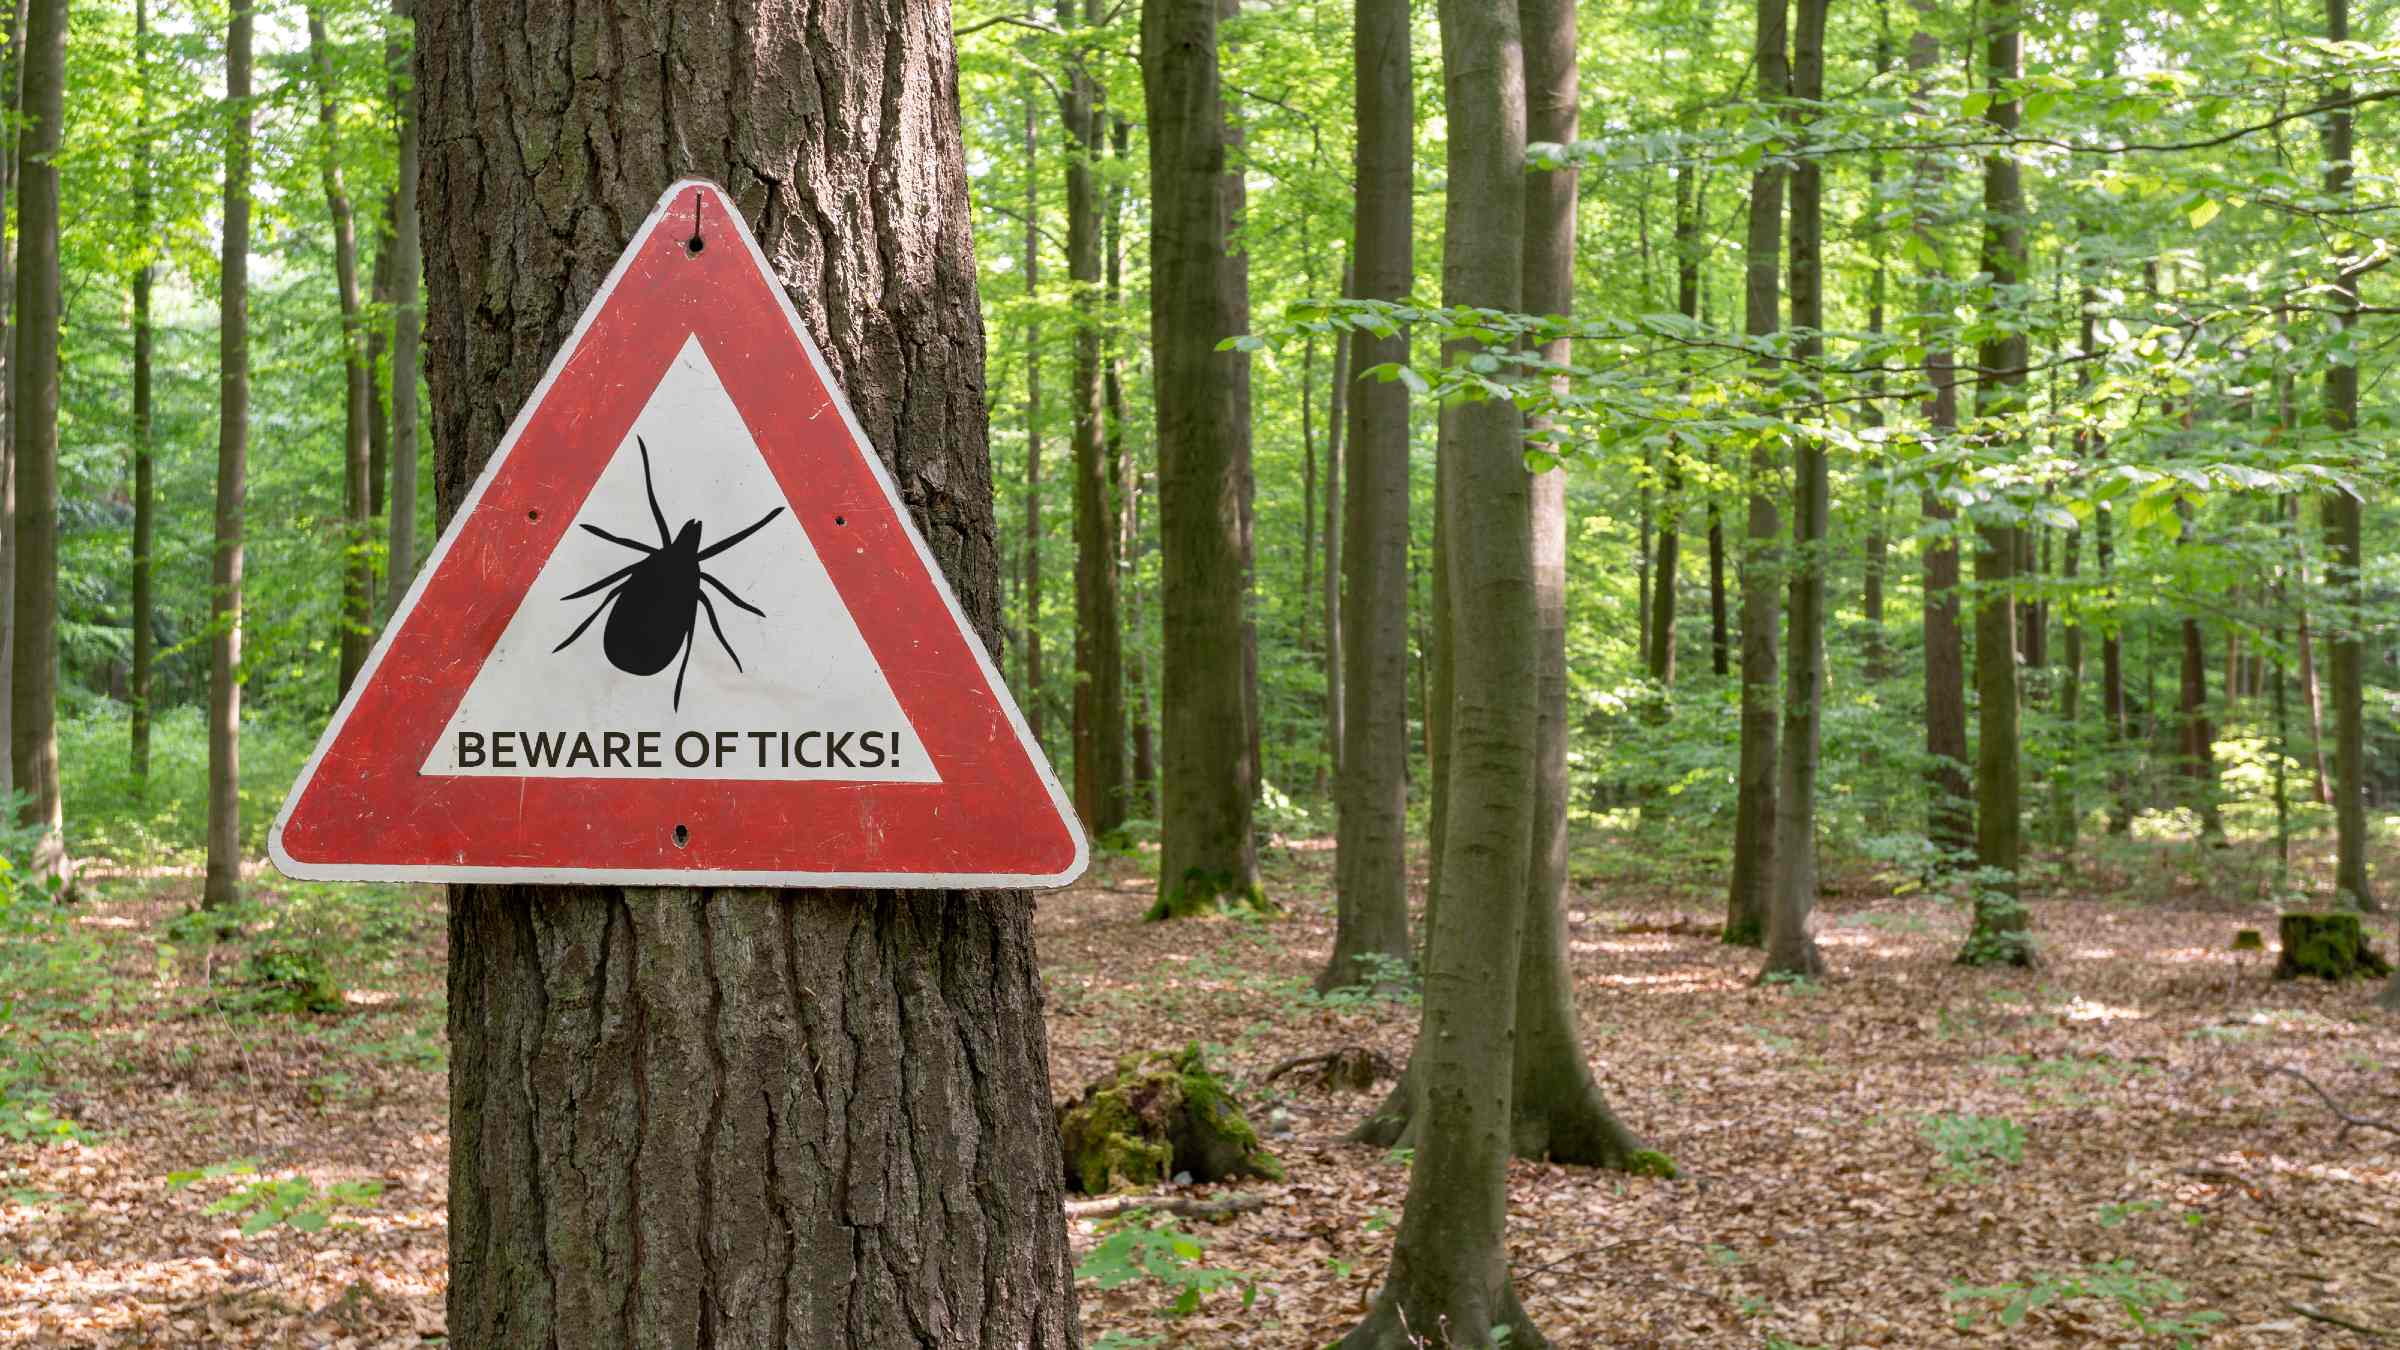 Sign on a tree in the forest: Beware of Ticks!